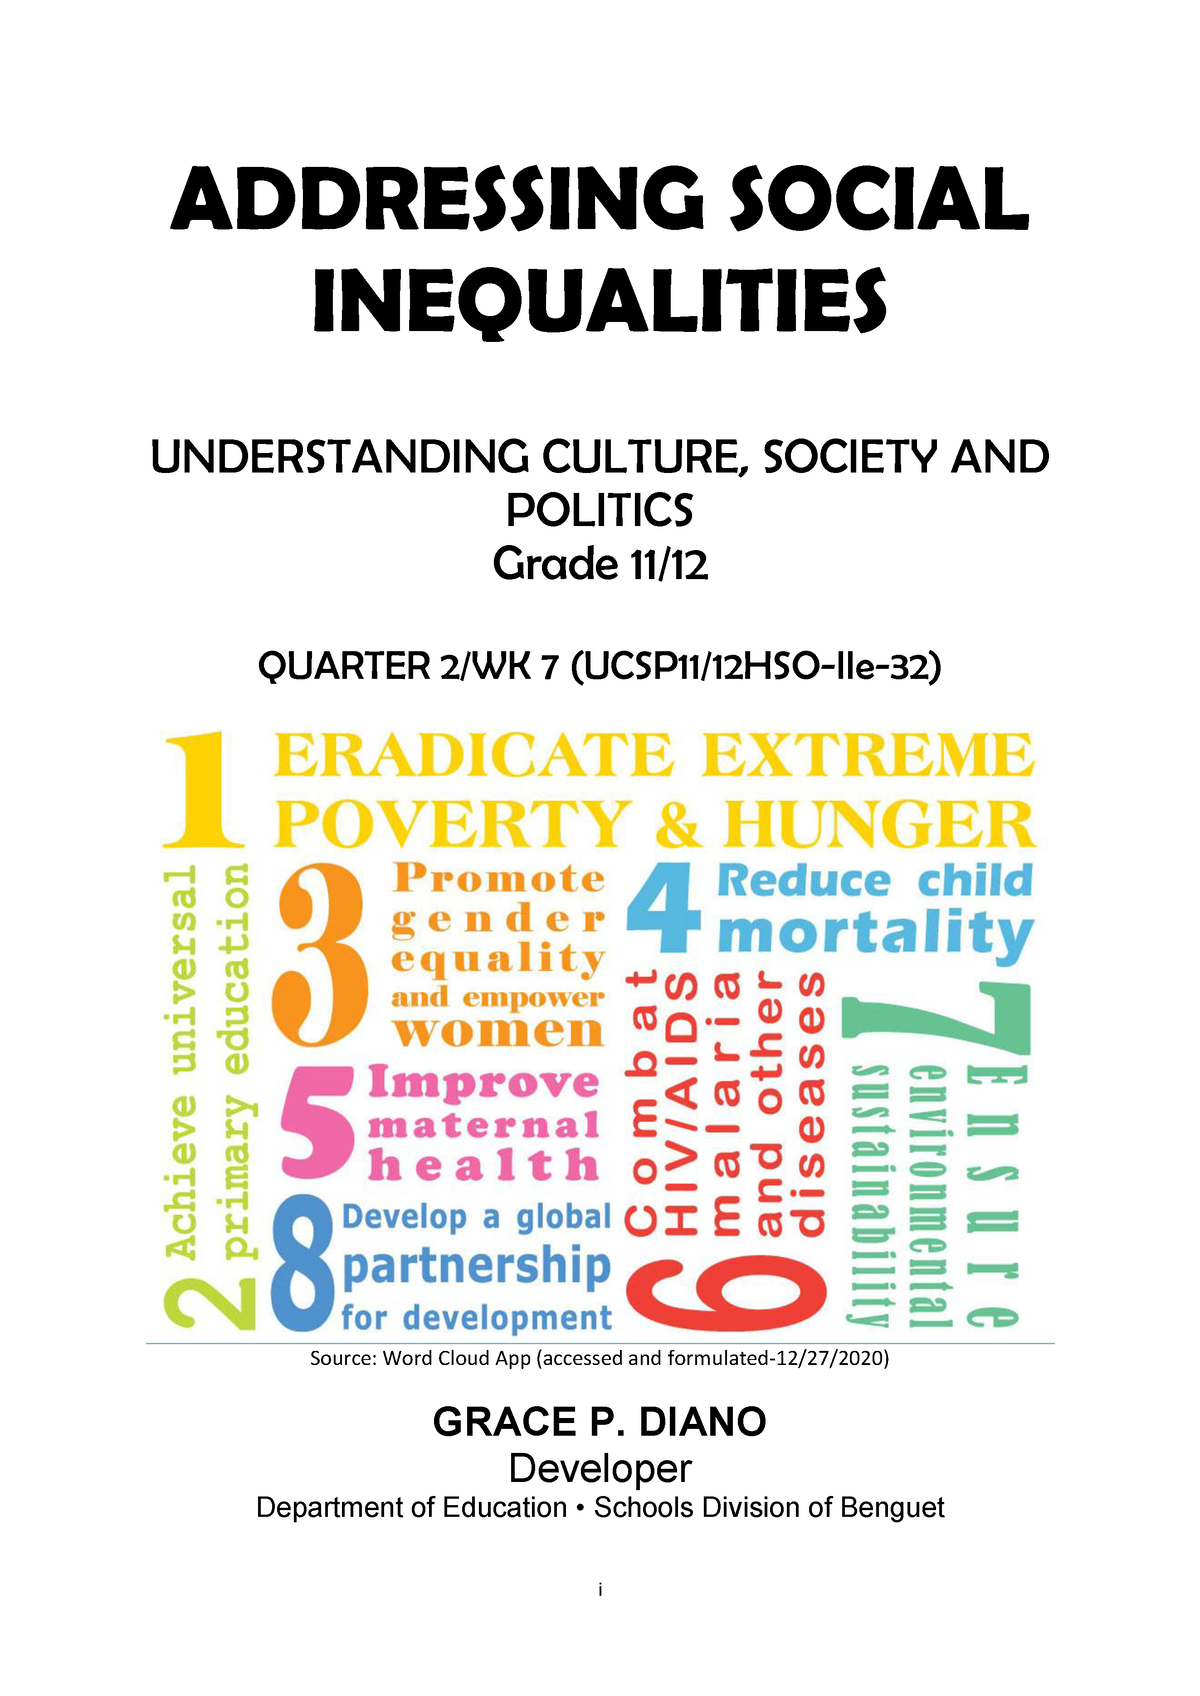 essay about government programs that address social inequalities